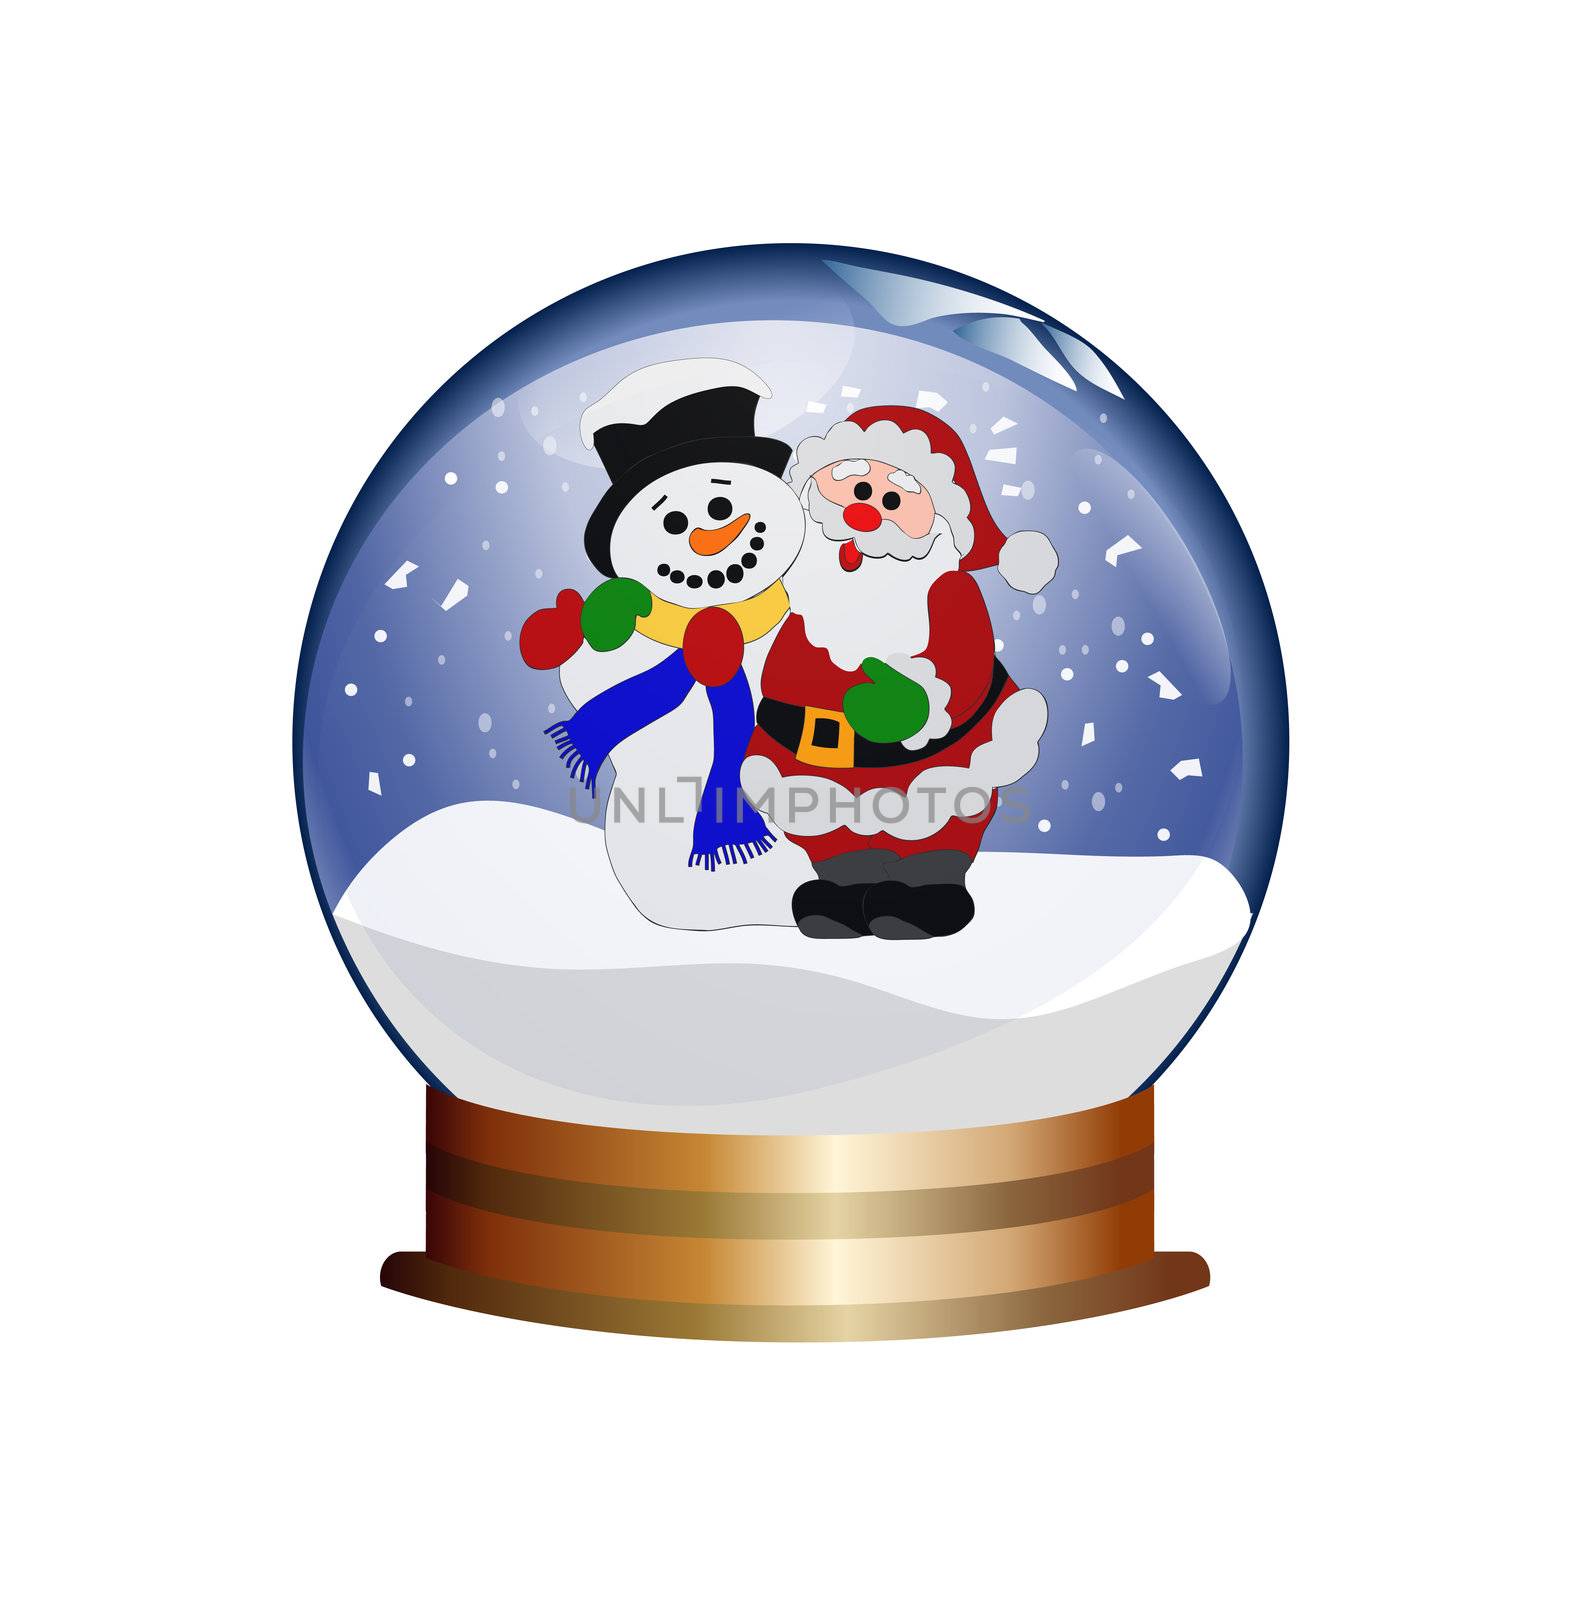 snowglobe with santa claus and snowman by peromarketing